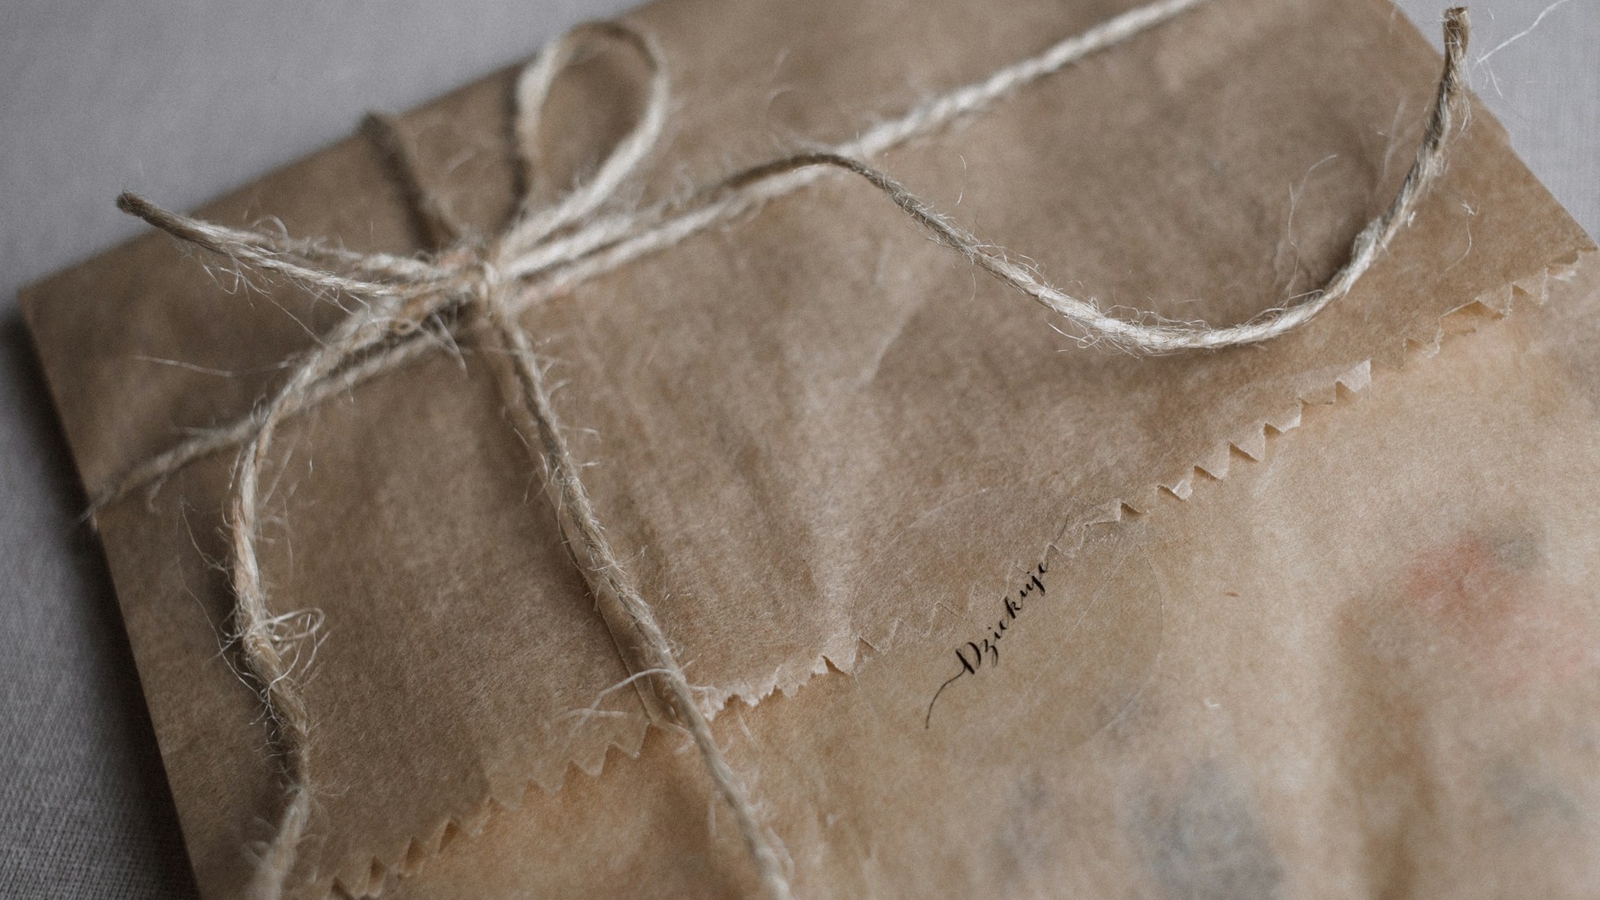 A gift wrapped in brown paper and string